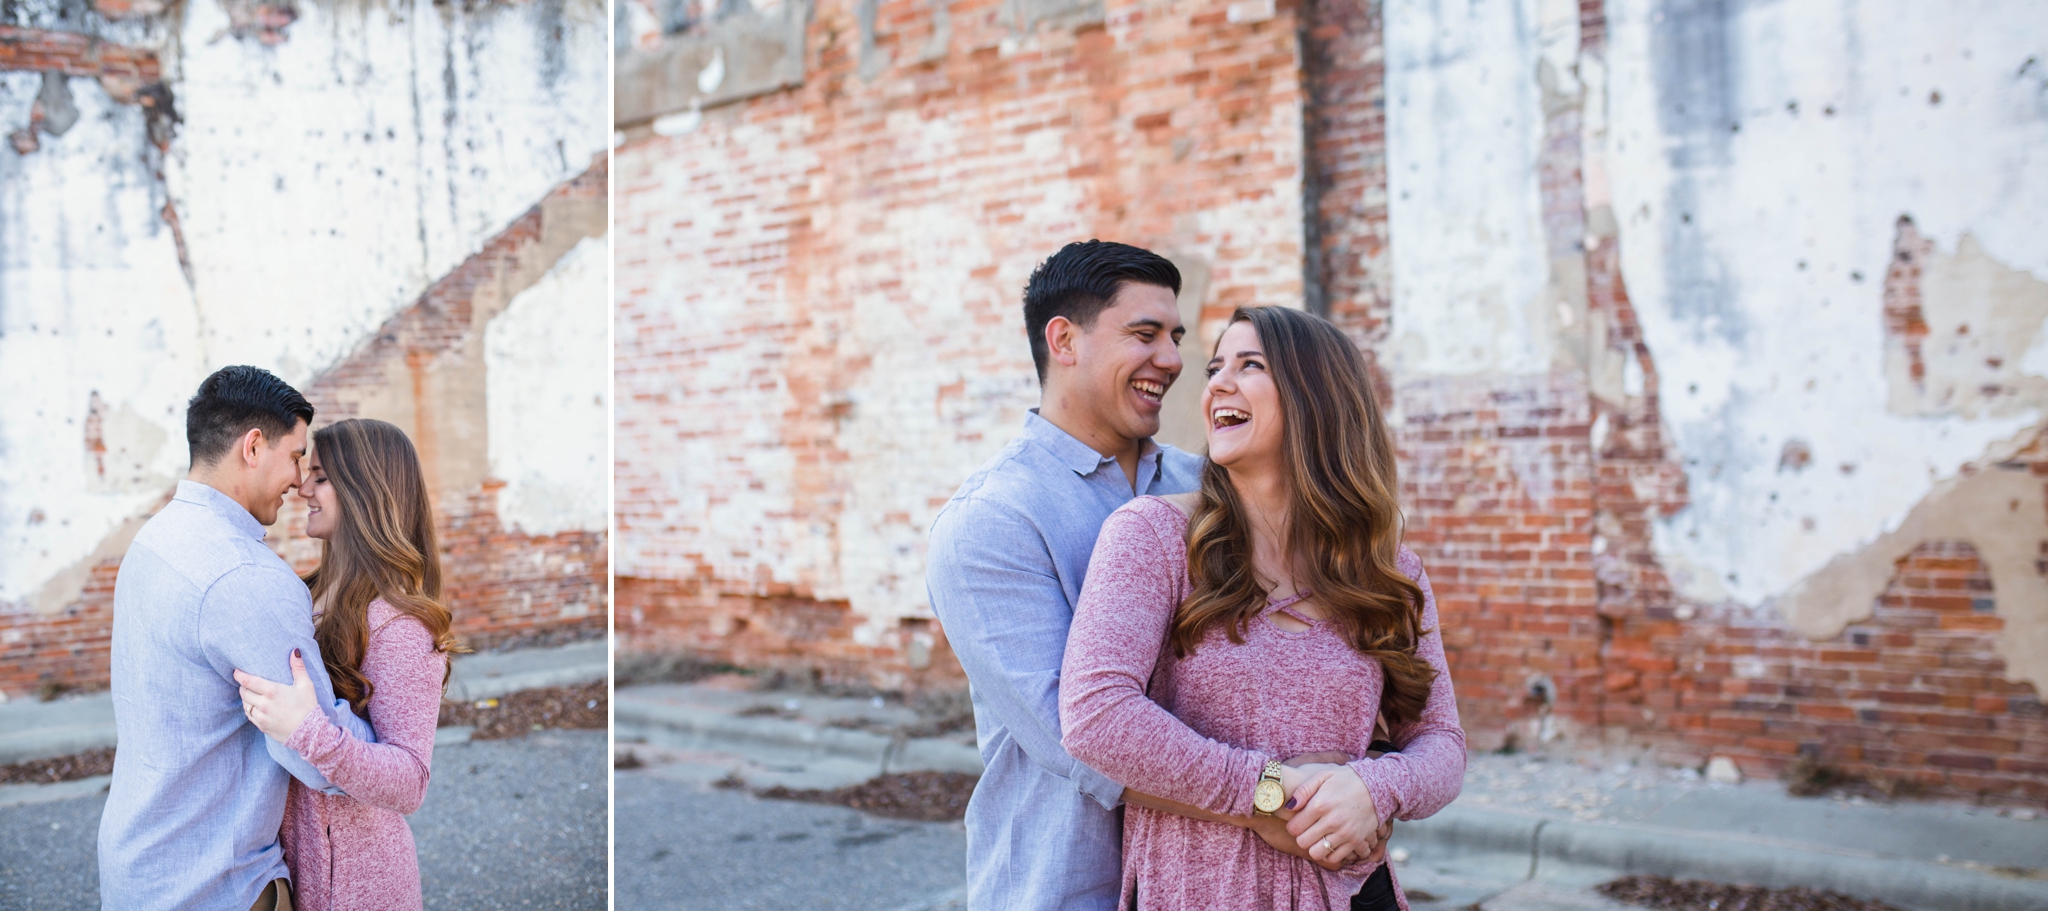 Jessica + Brandon - Engagement Photography in Downtown Fayetteville North Carolina